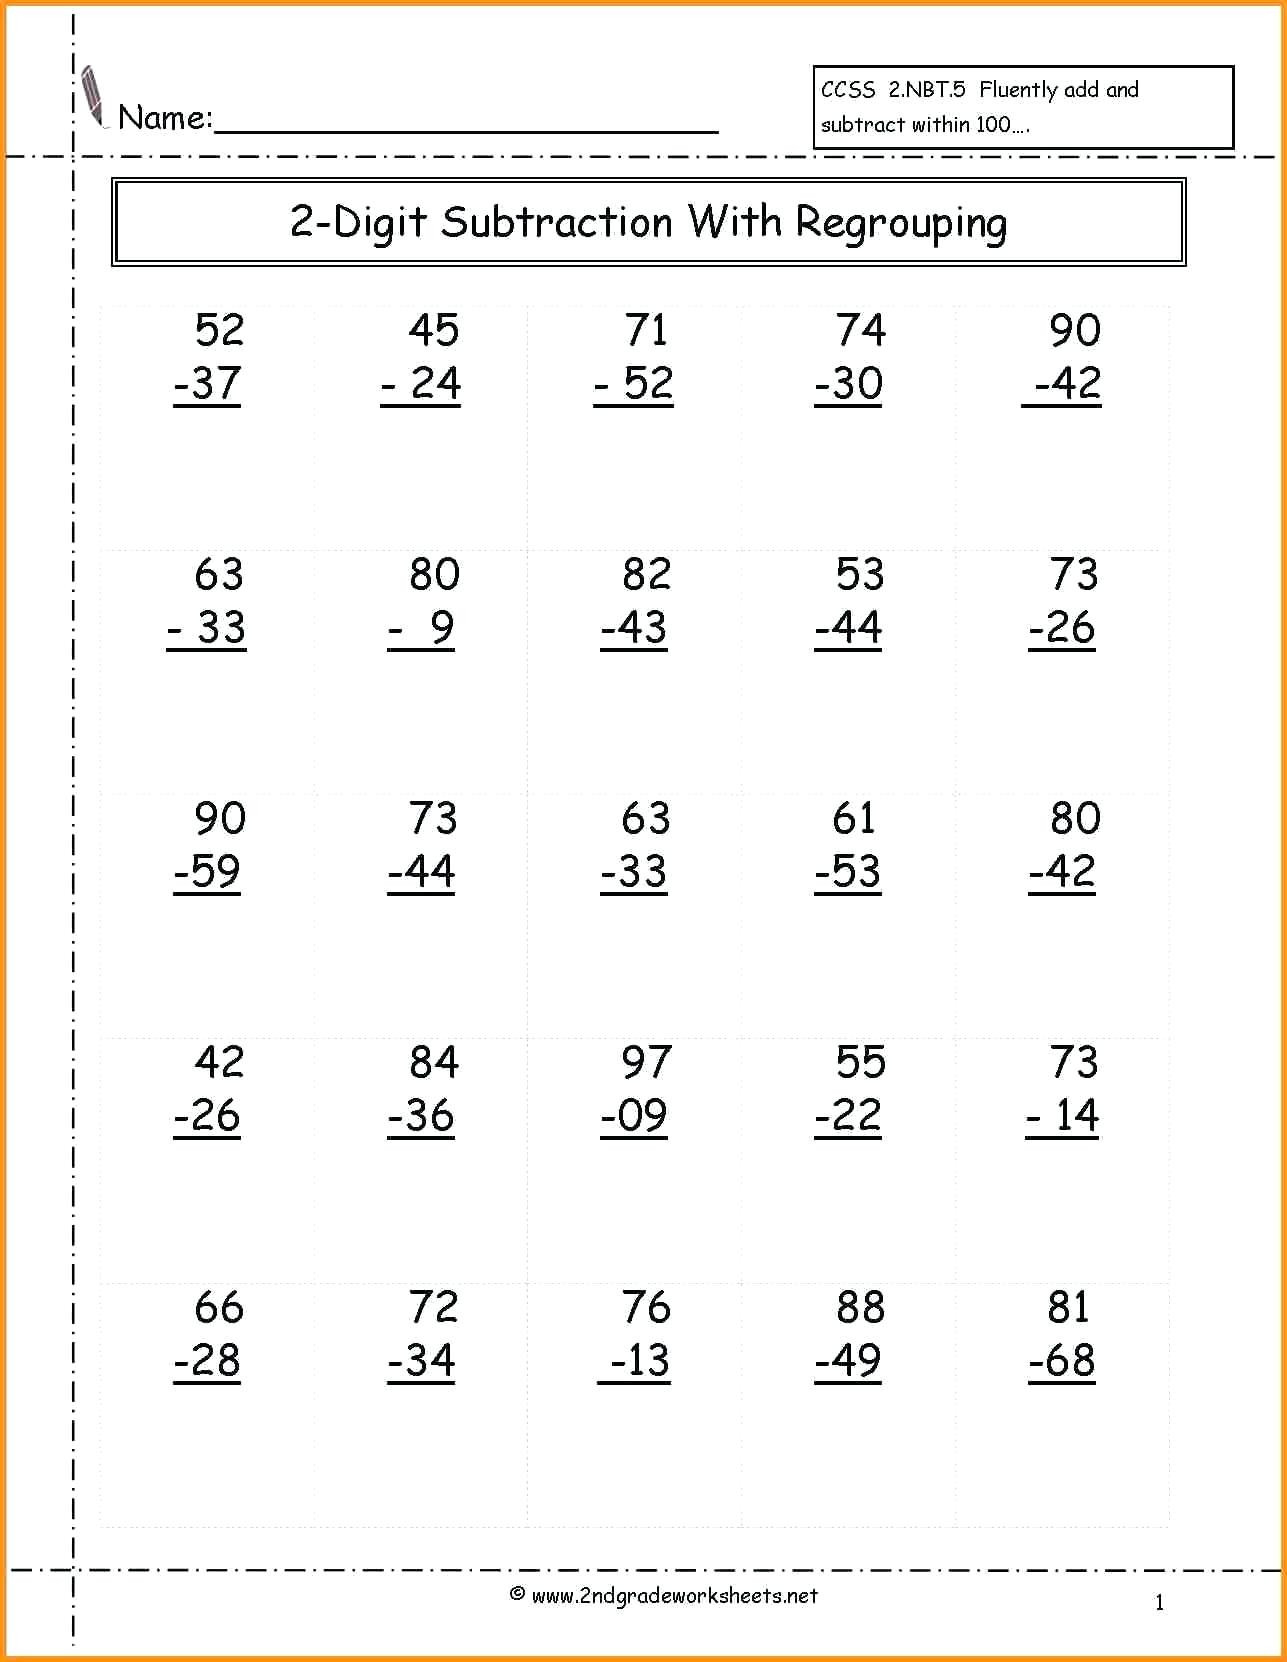 4 Free Math Worksheets First Grade 1 Subtraction Subtract 